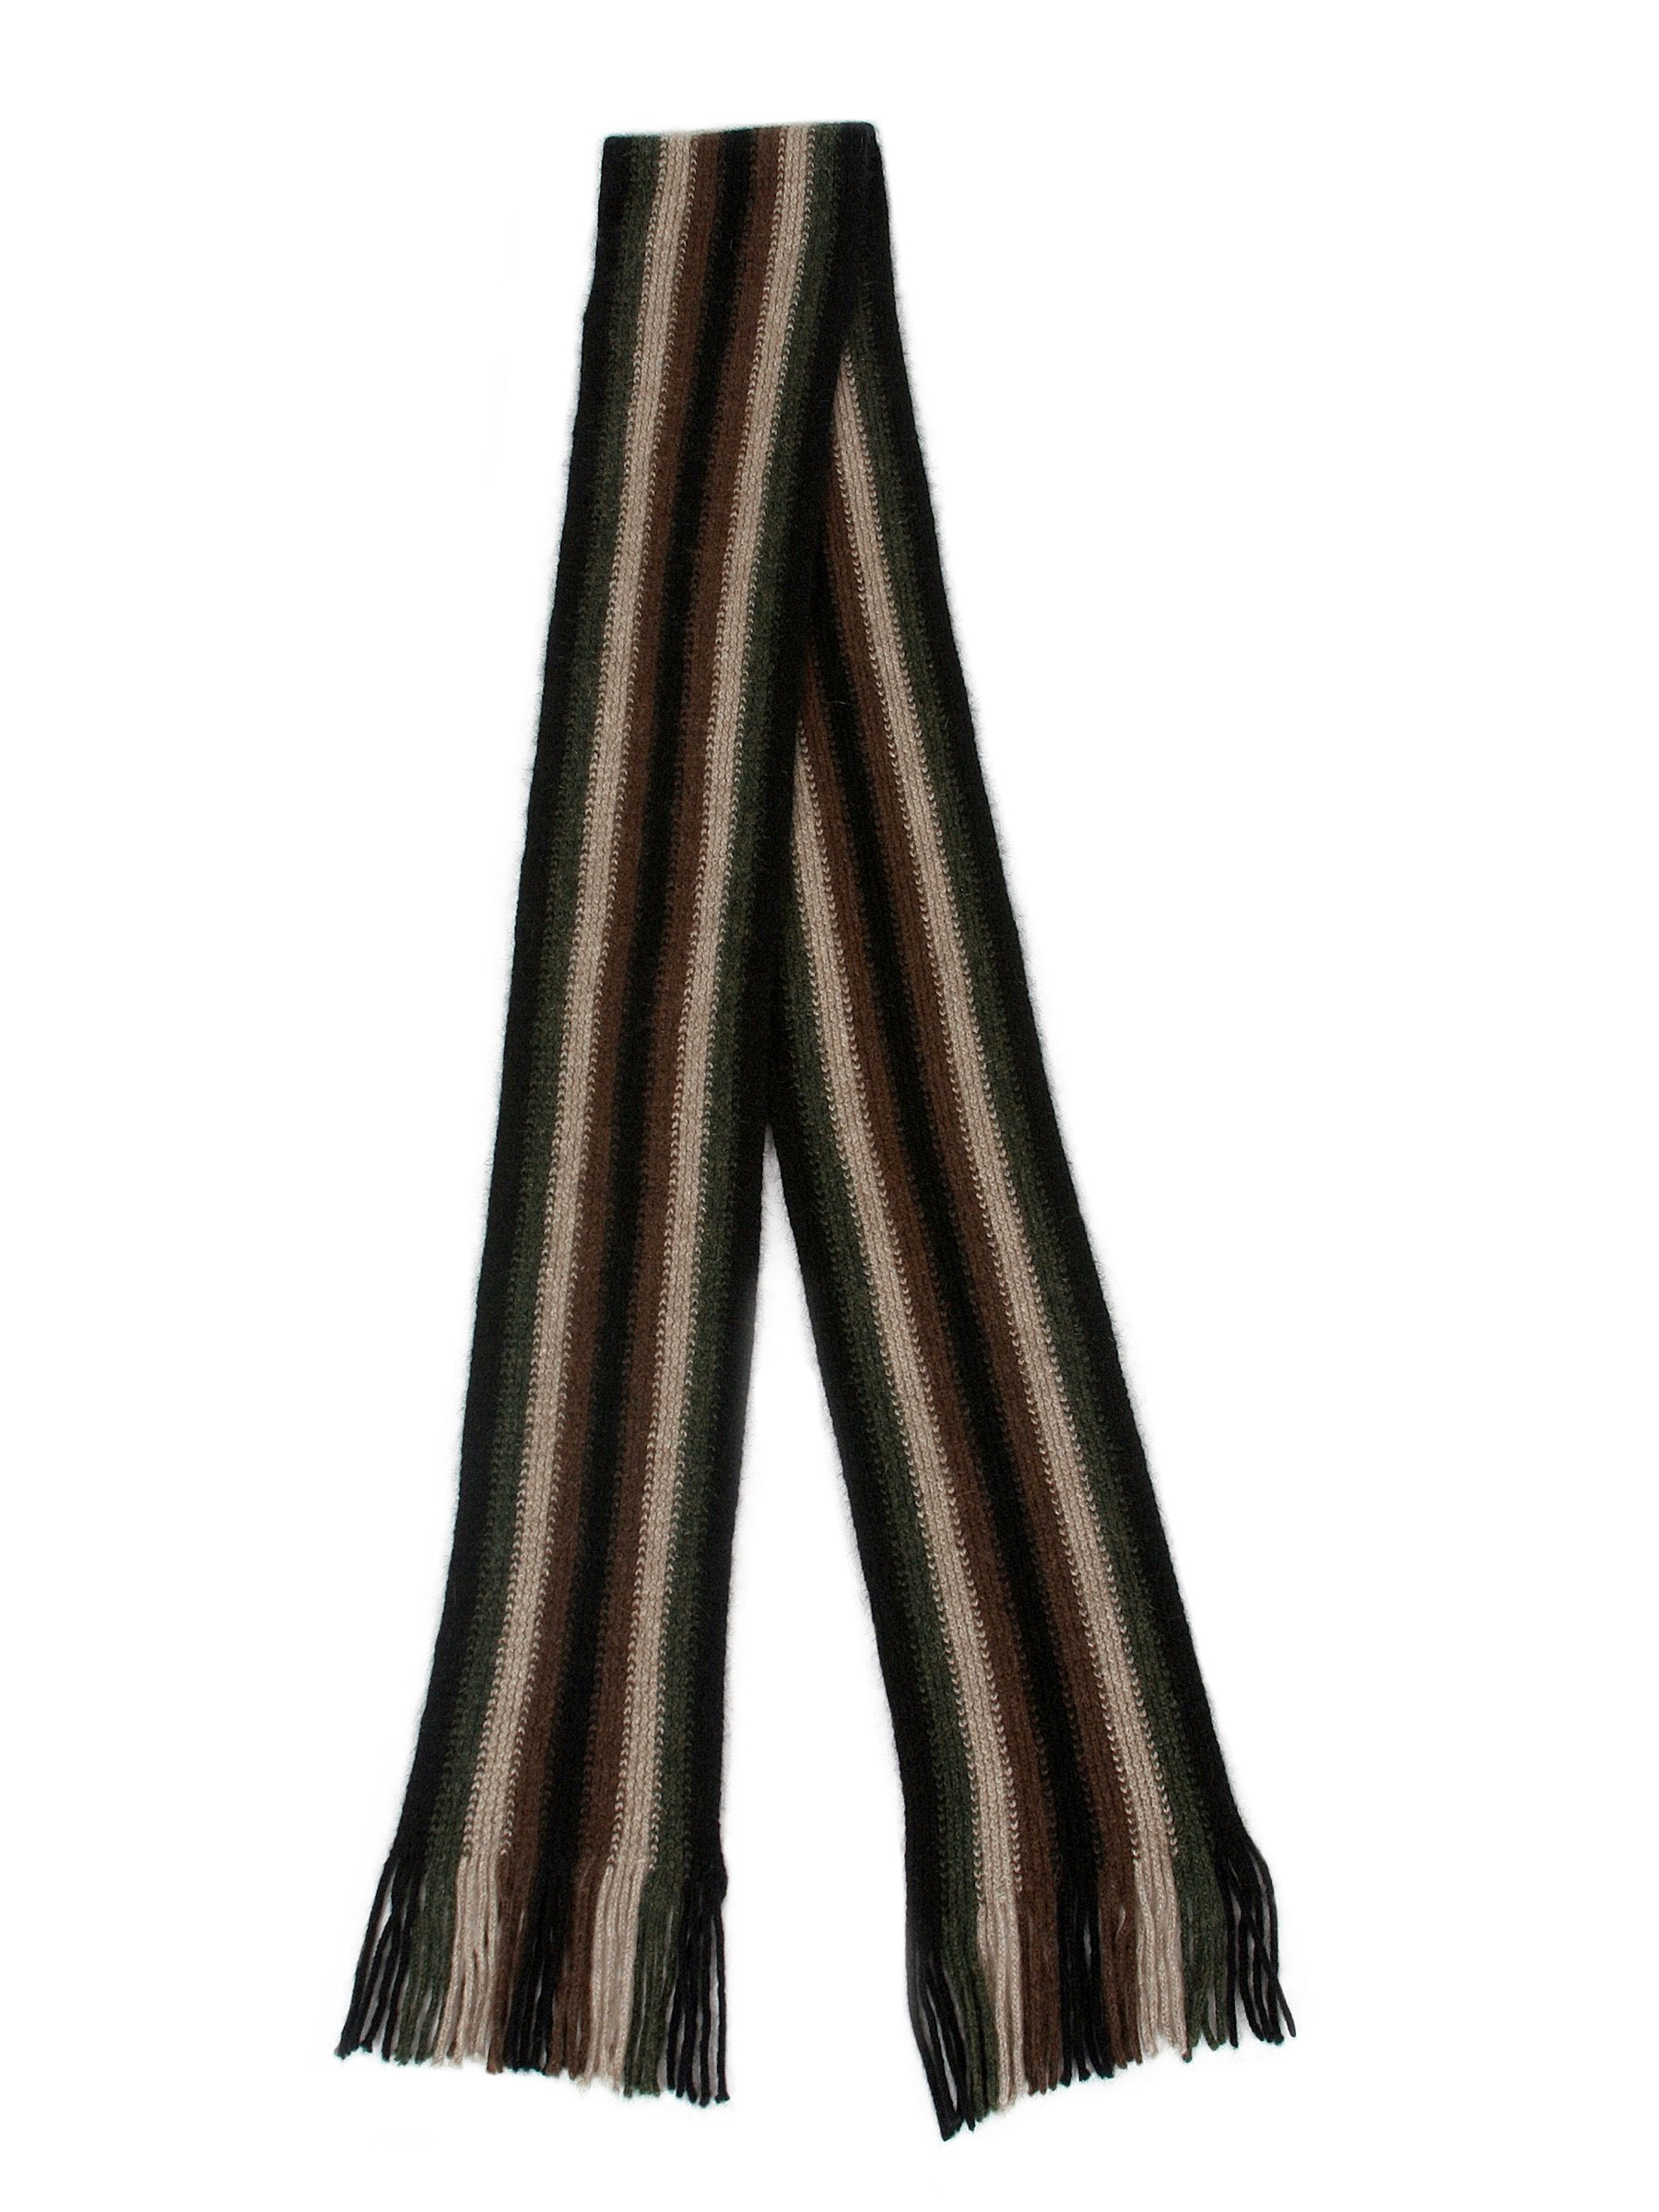 LONG VERTICAL STRIPED SCARF - Woolshed Gallery